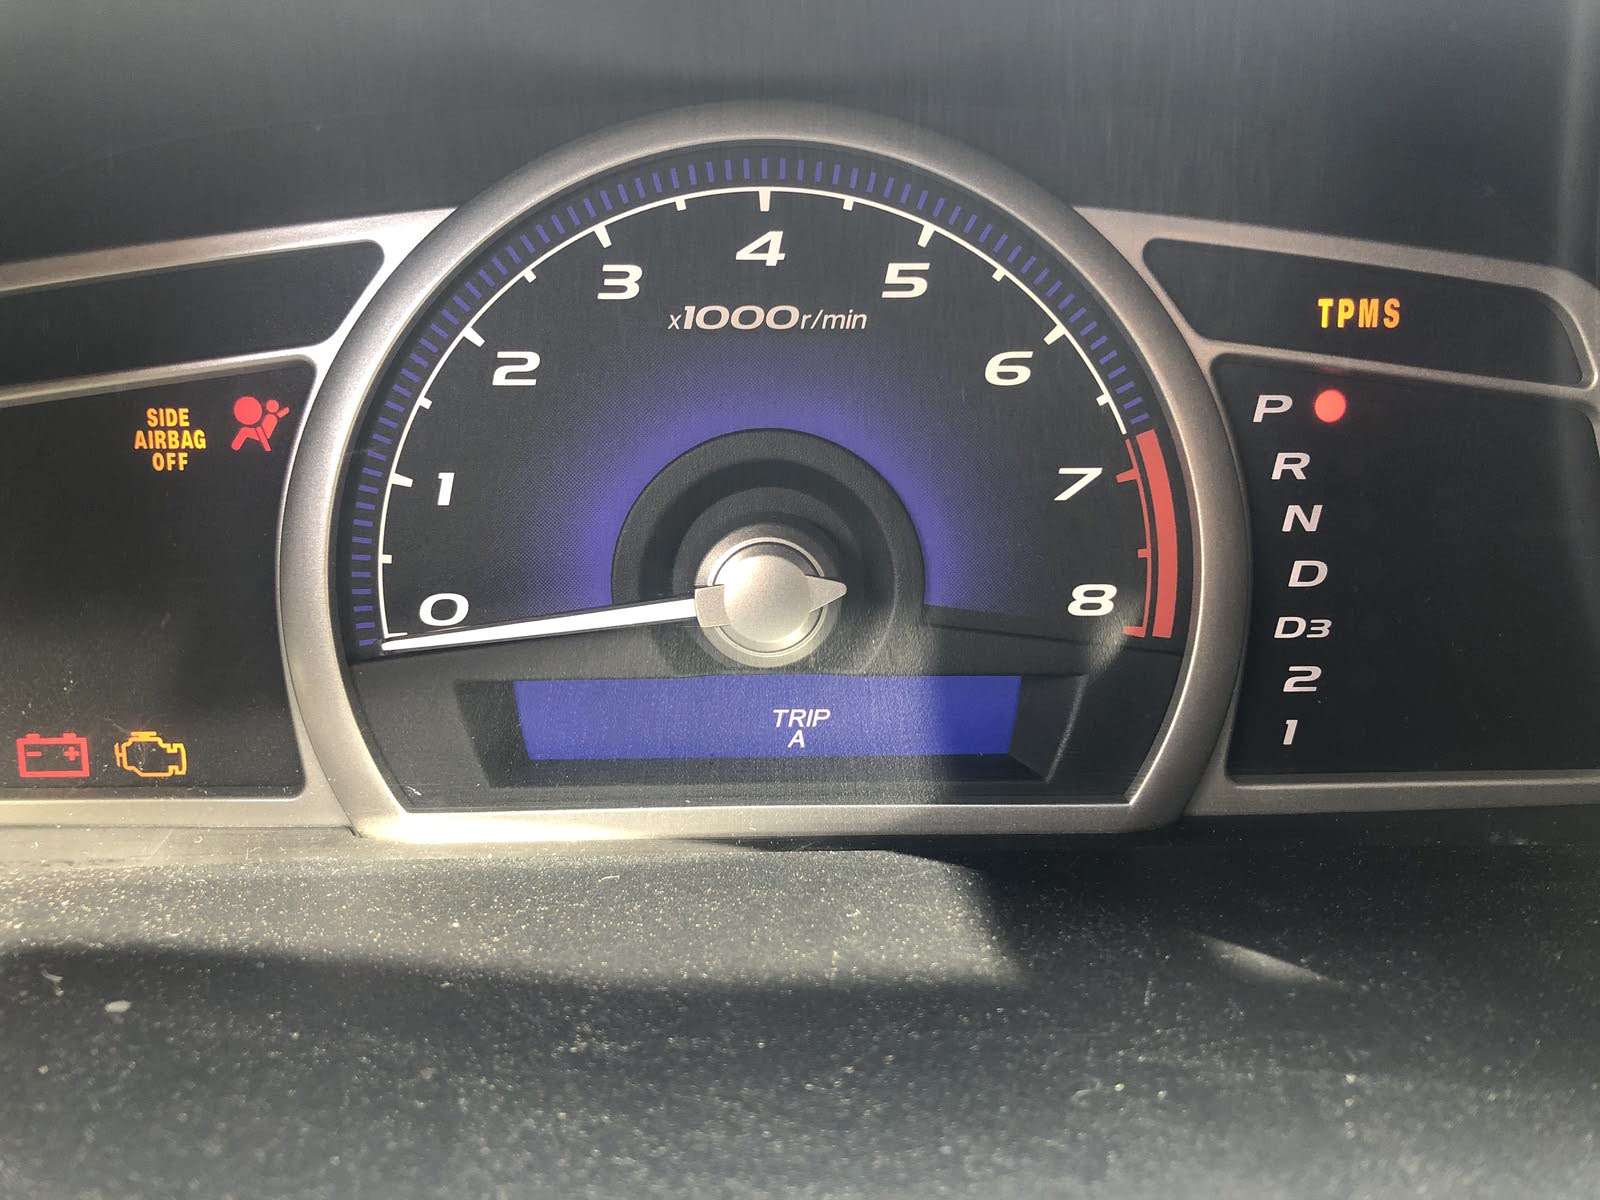 Honda Civic Questions - Odometer does not show mileage but shows oil life -  CarGurus